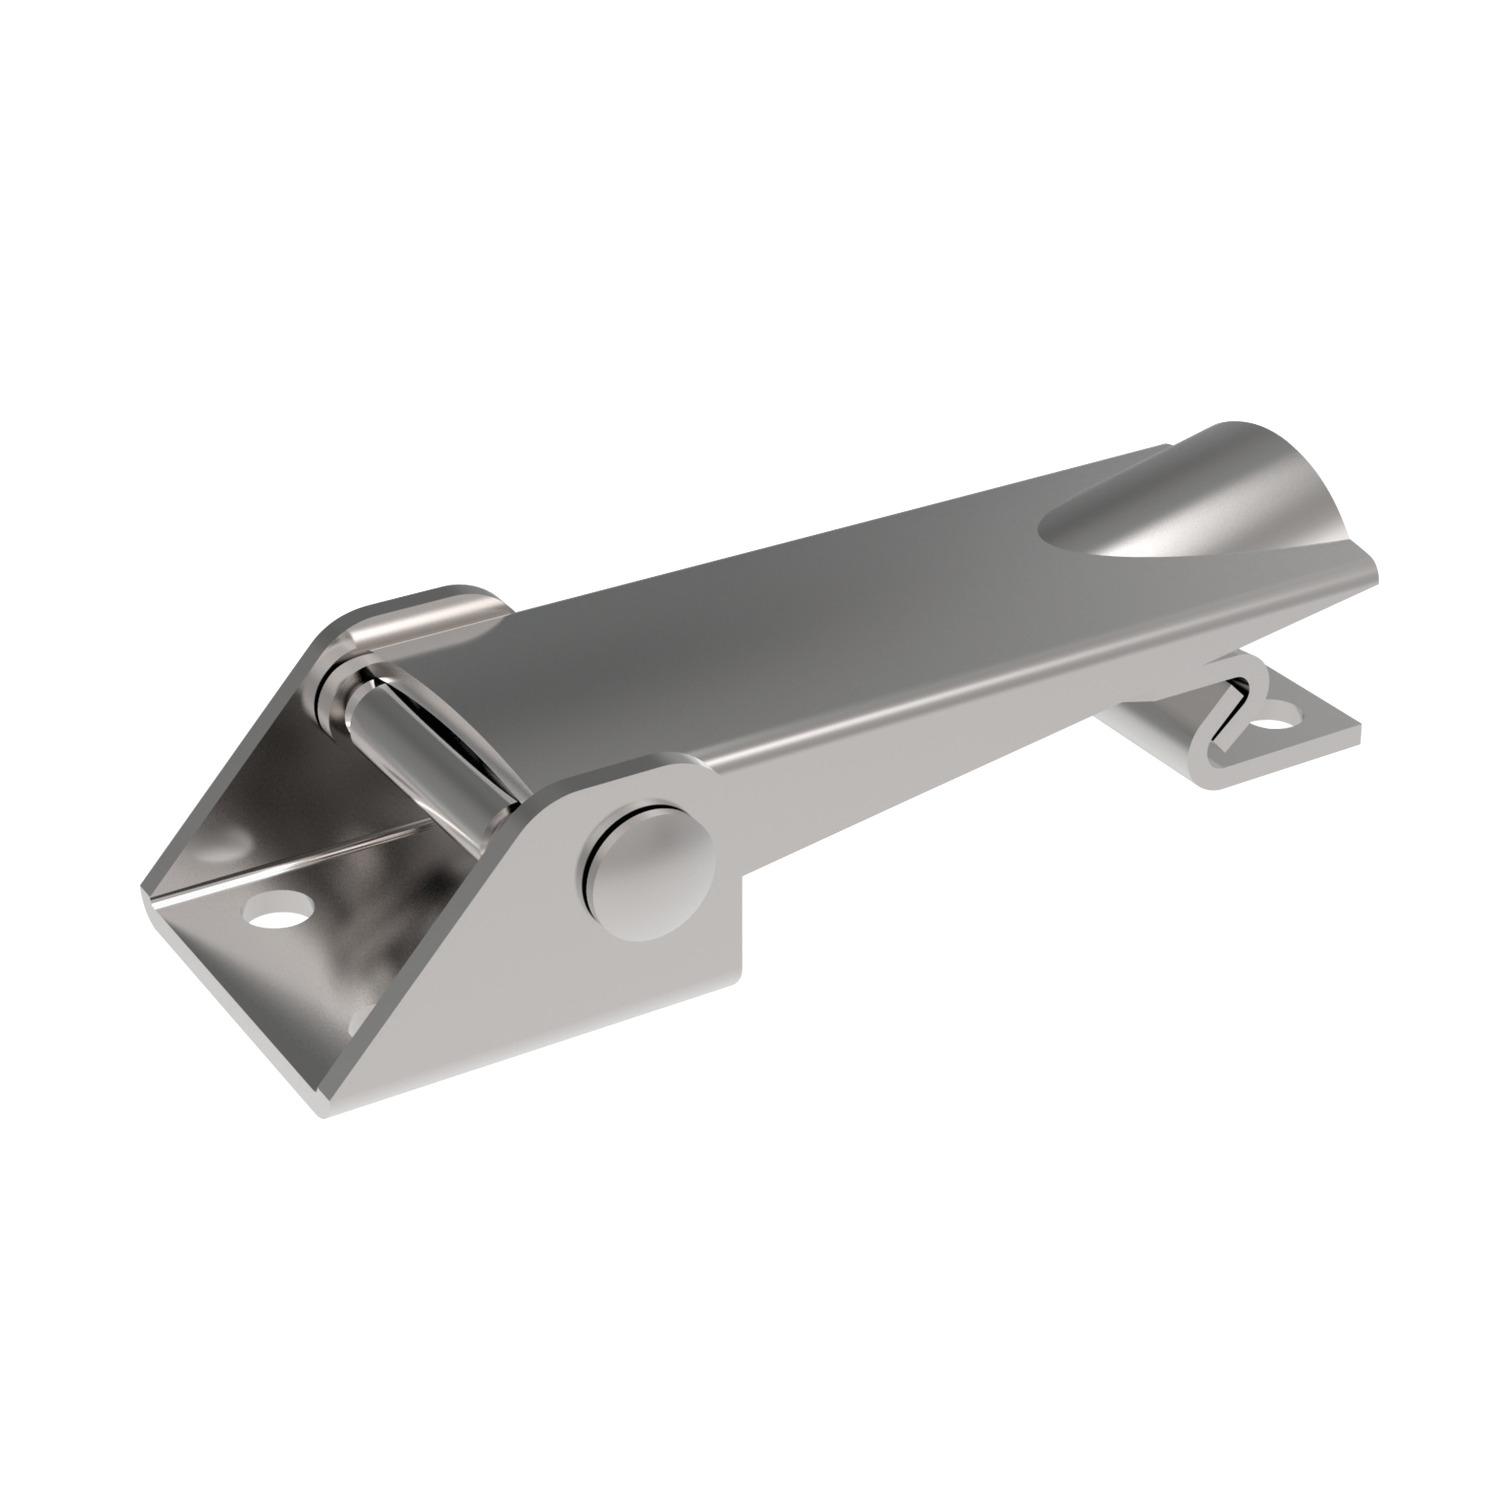 Toggle Latches Draw length adjustable through turns of threaded draw rod, giving 10mm length of adjustment. Available in steel or stainless steel.